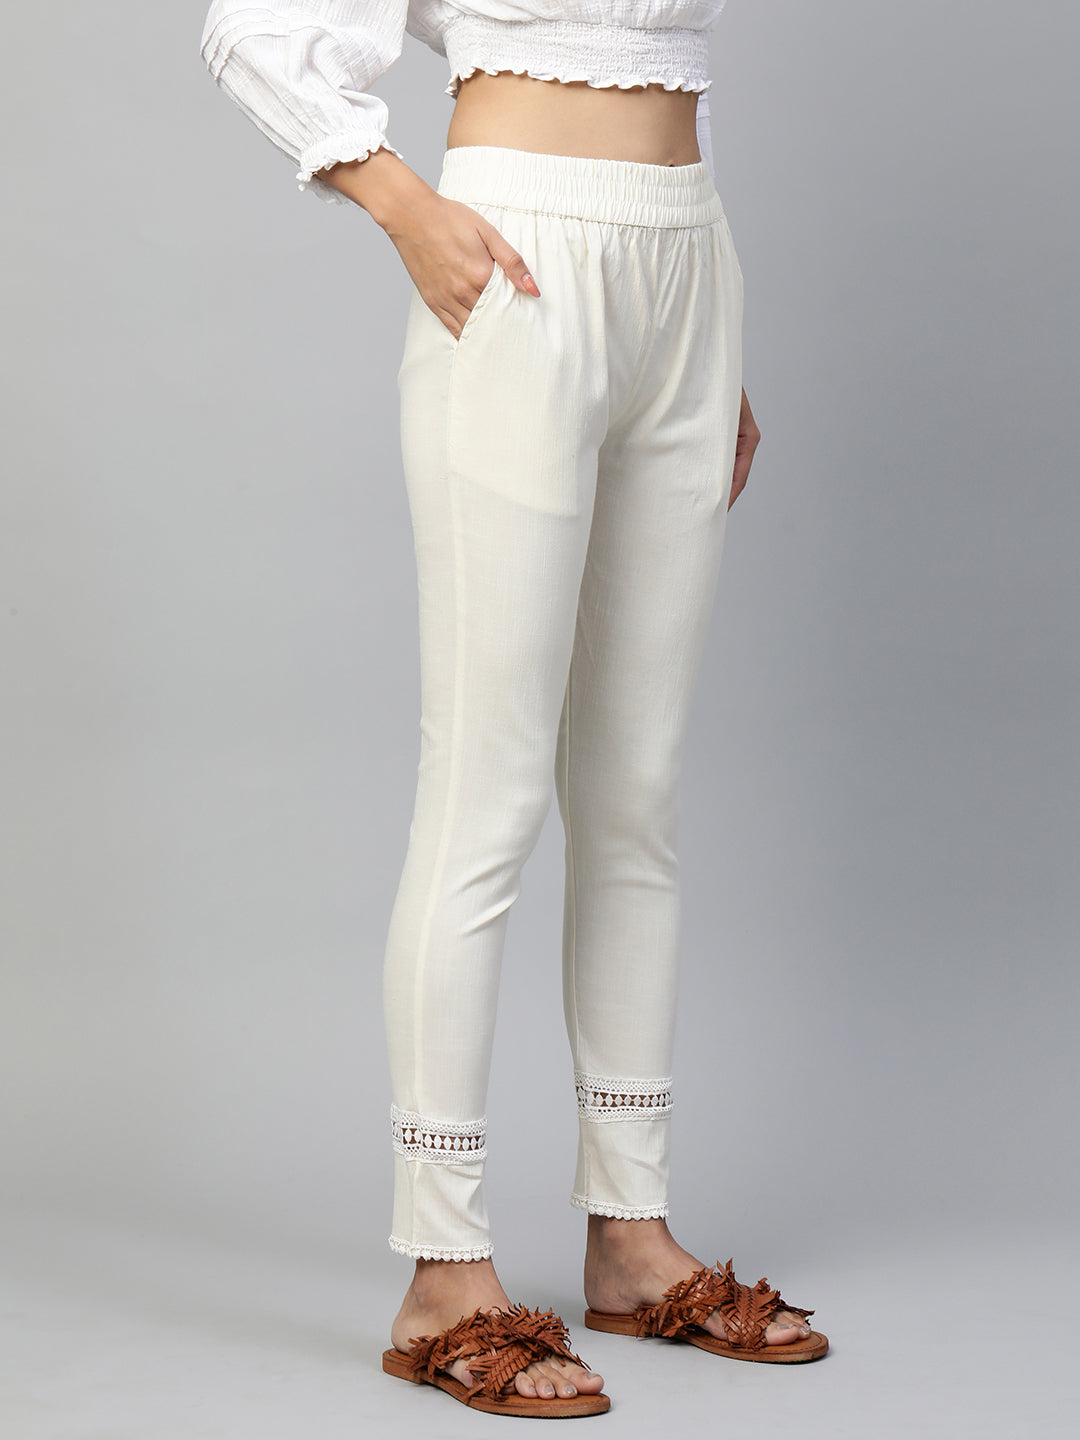 Body Fitted Lycra Ankle Leggings - Off White